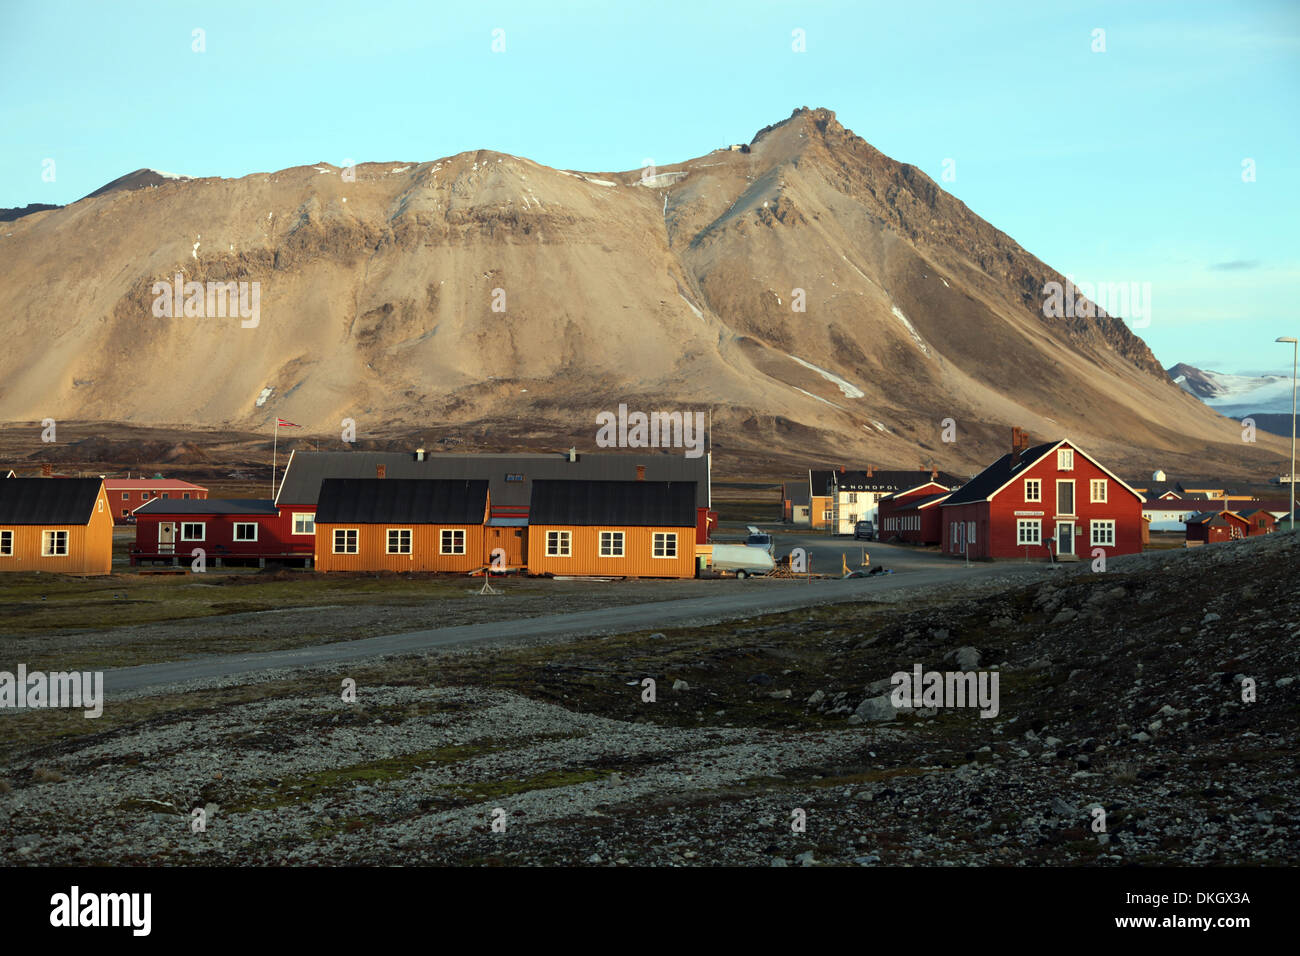 Ny Alesund, the most northerly settlement in the world, a base for international scientists, Svalbard, Norway, Scandinavia Stock Photo